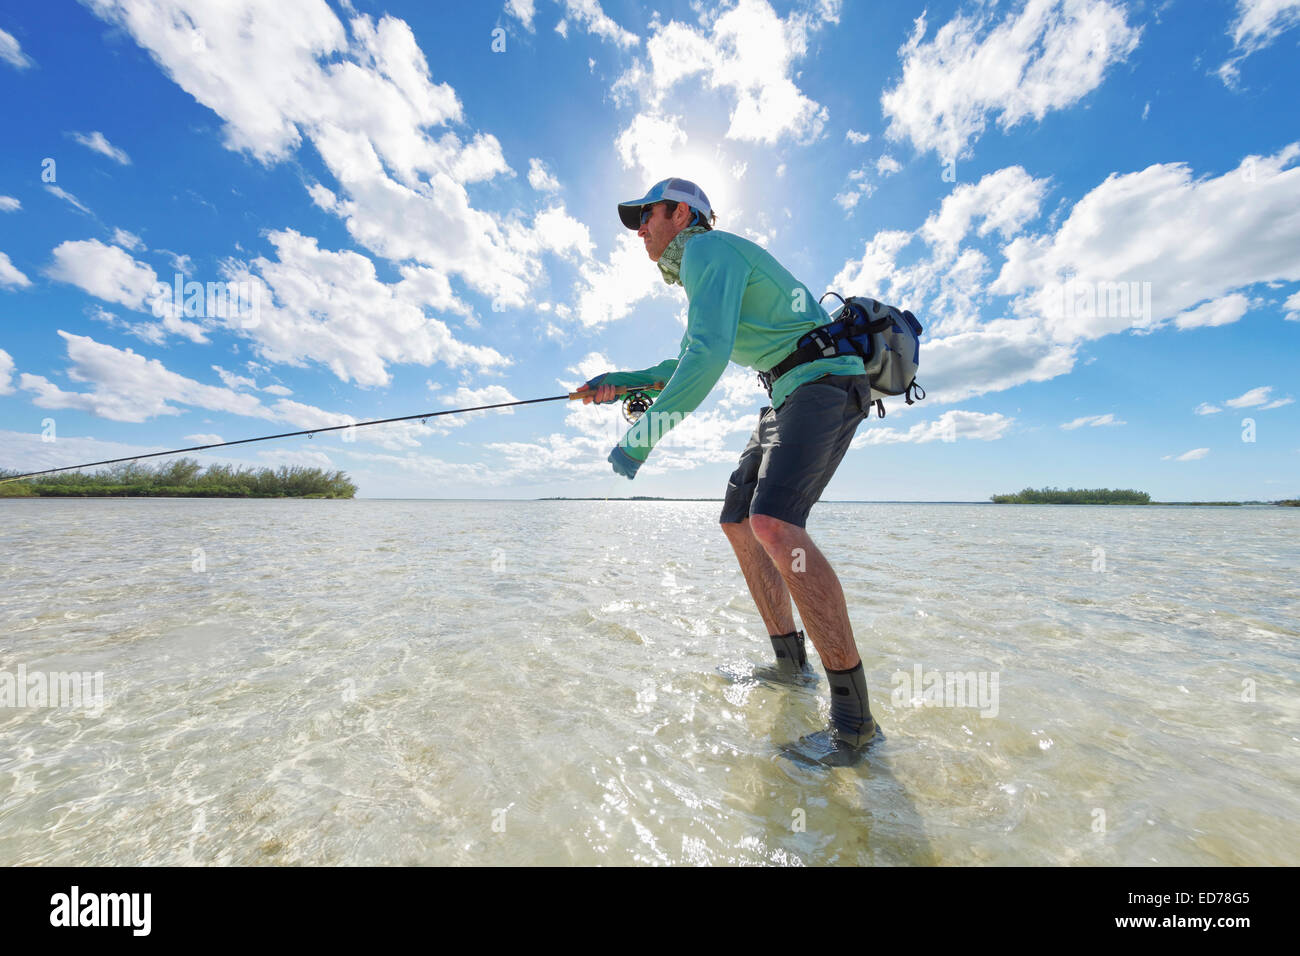 Saltwater fly fishing for bonefish on the island of Abaco in the Bahamas Stock Photo